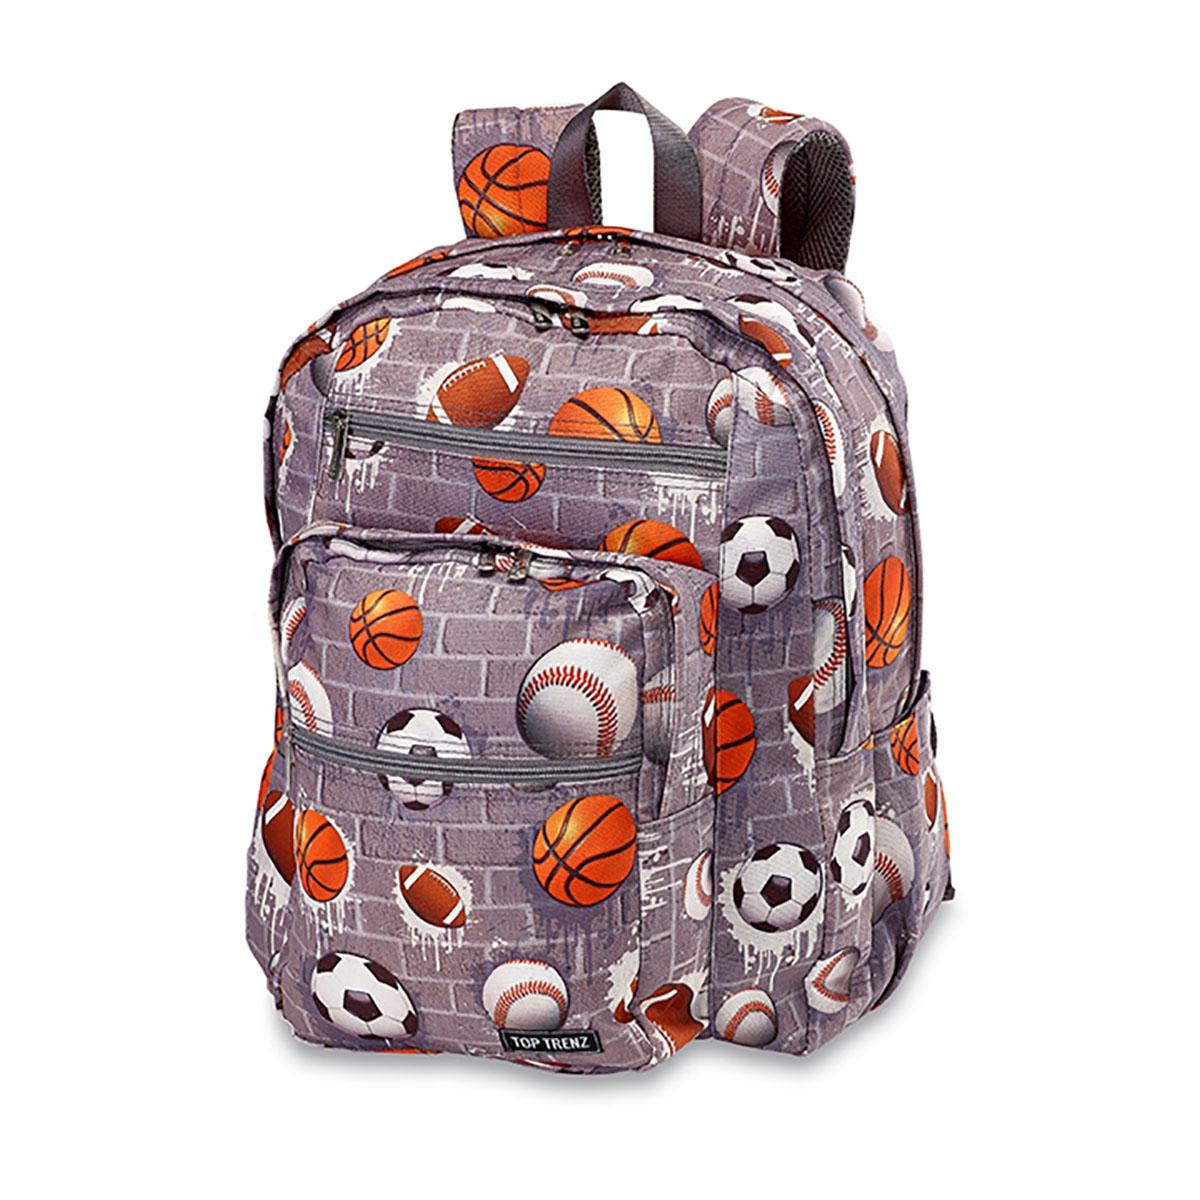 Top Trenz City Sports Backpack - BP-CITY5